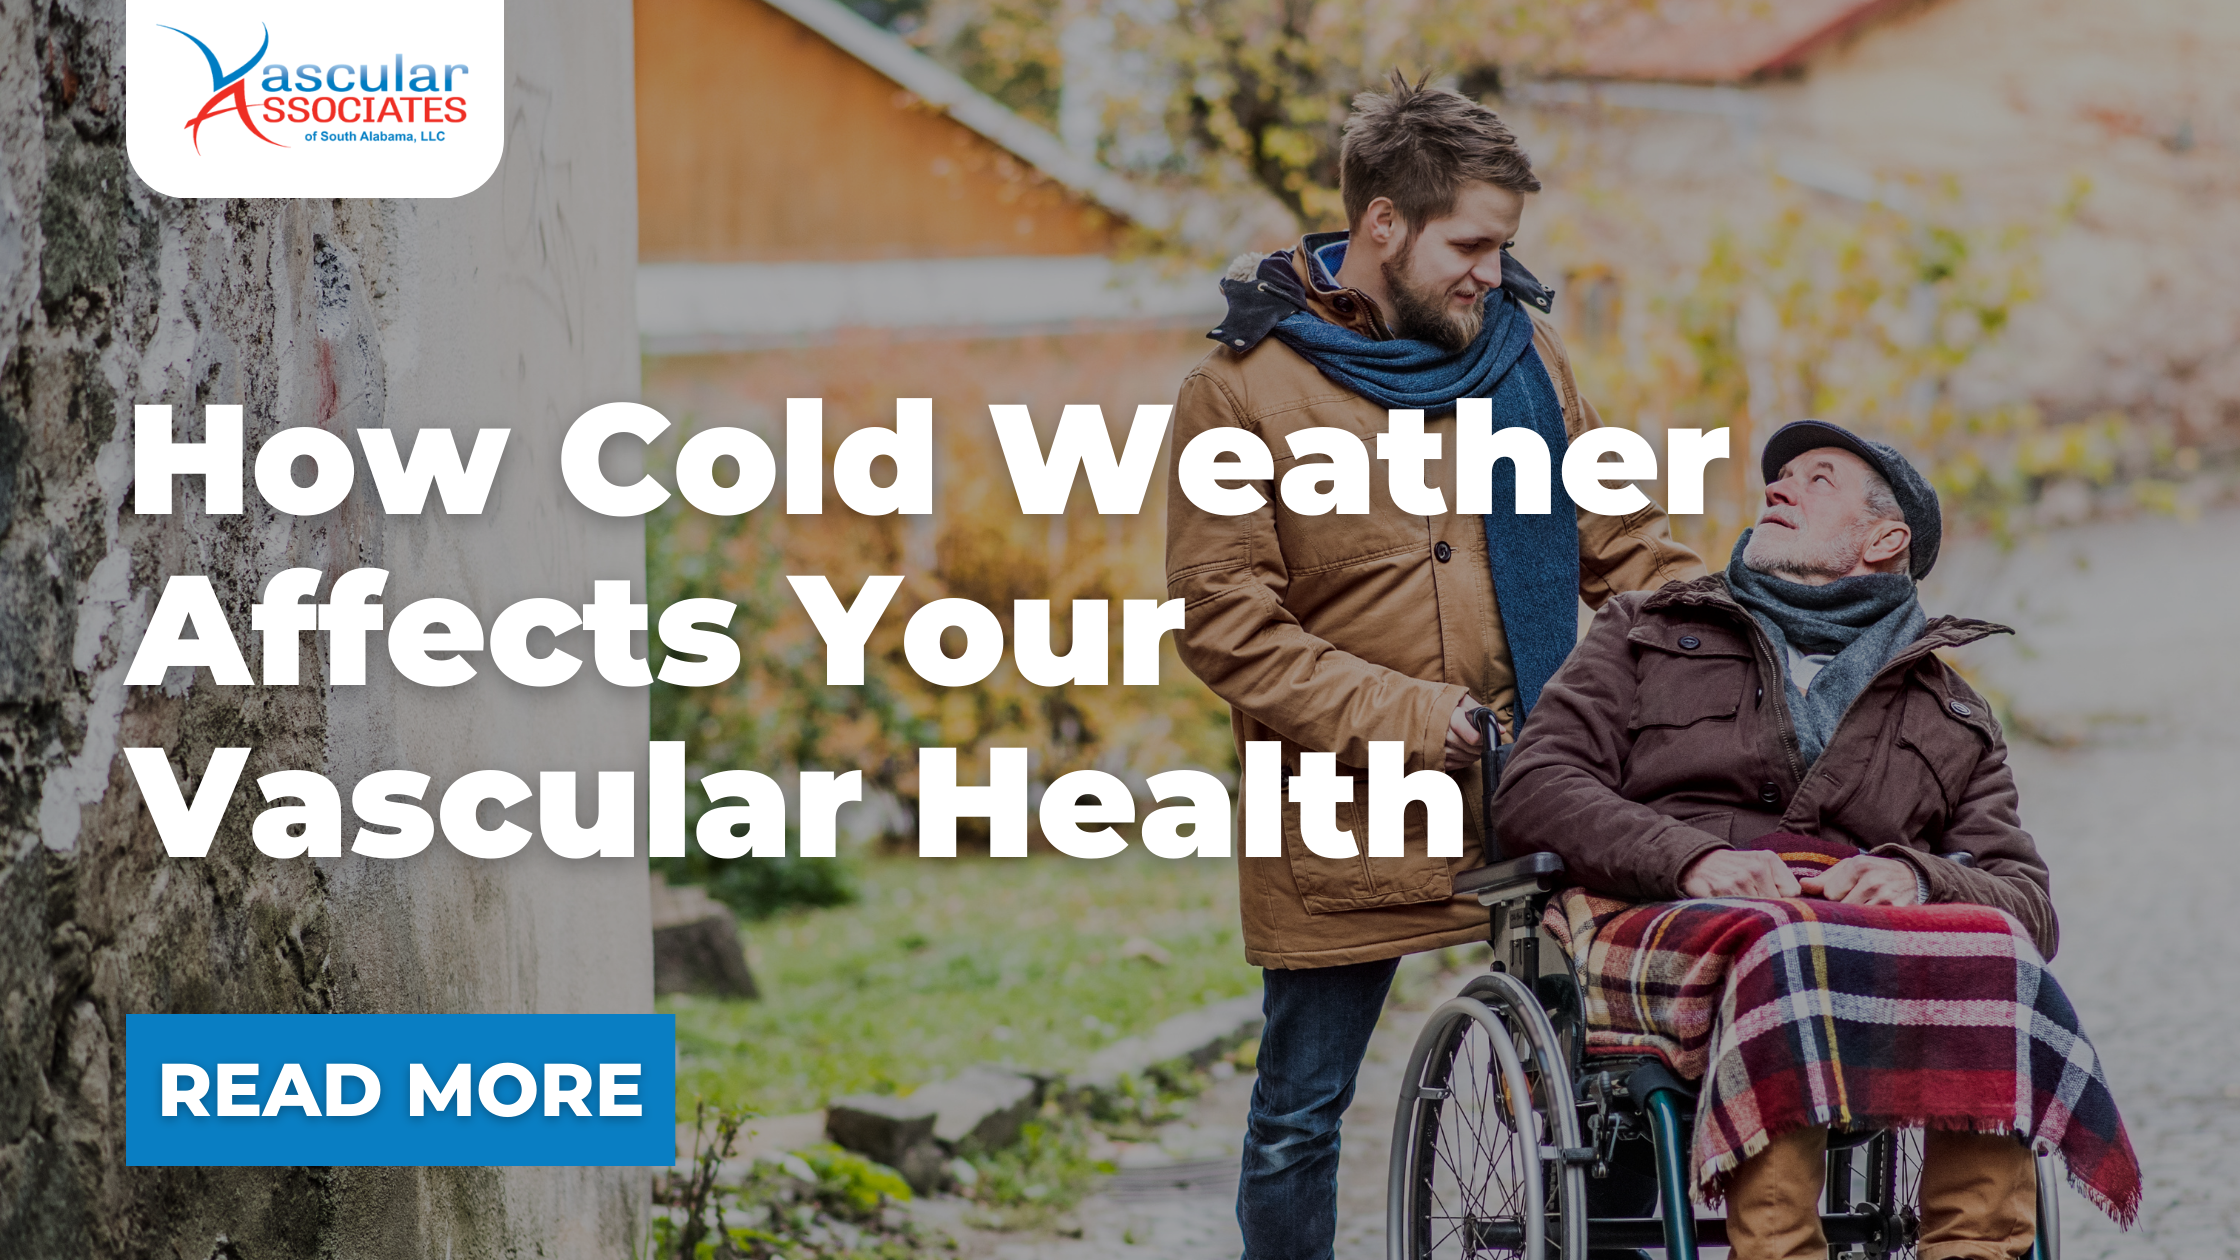 Vascular Blog - How Cold Weather Affects Your Vascular Health.png